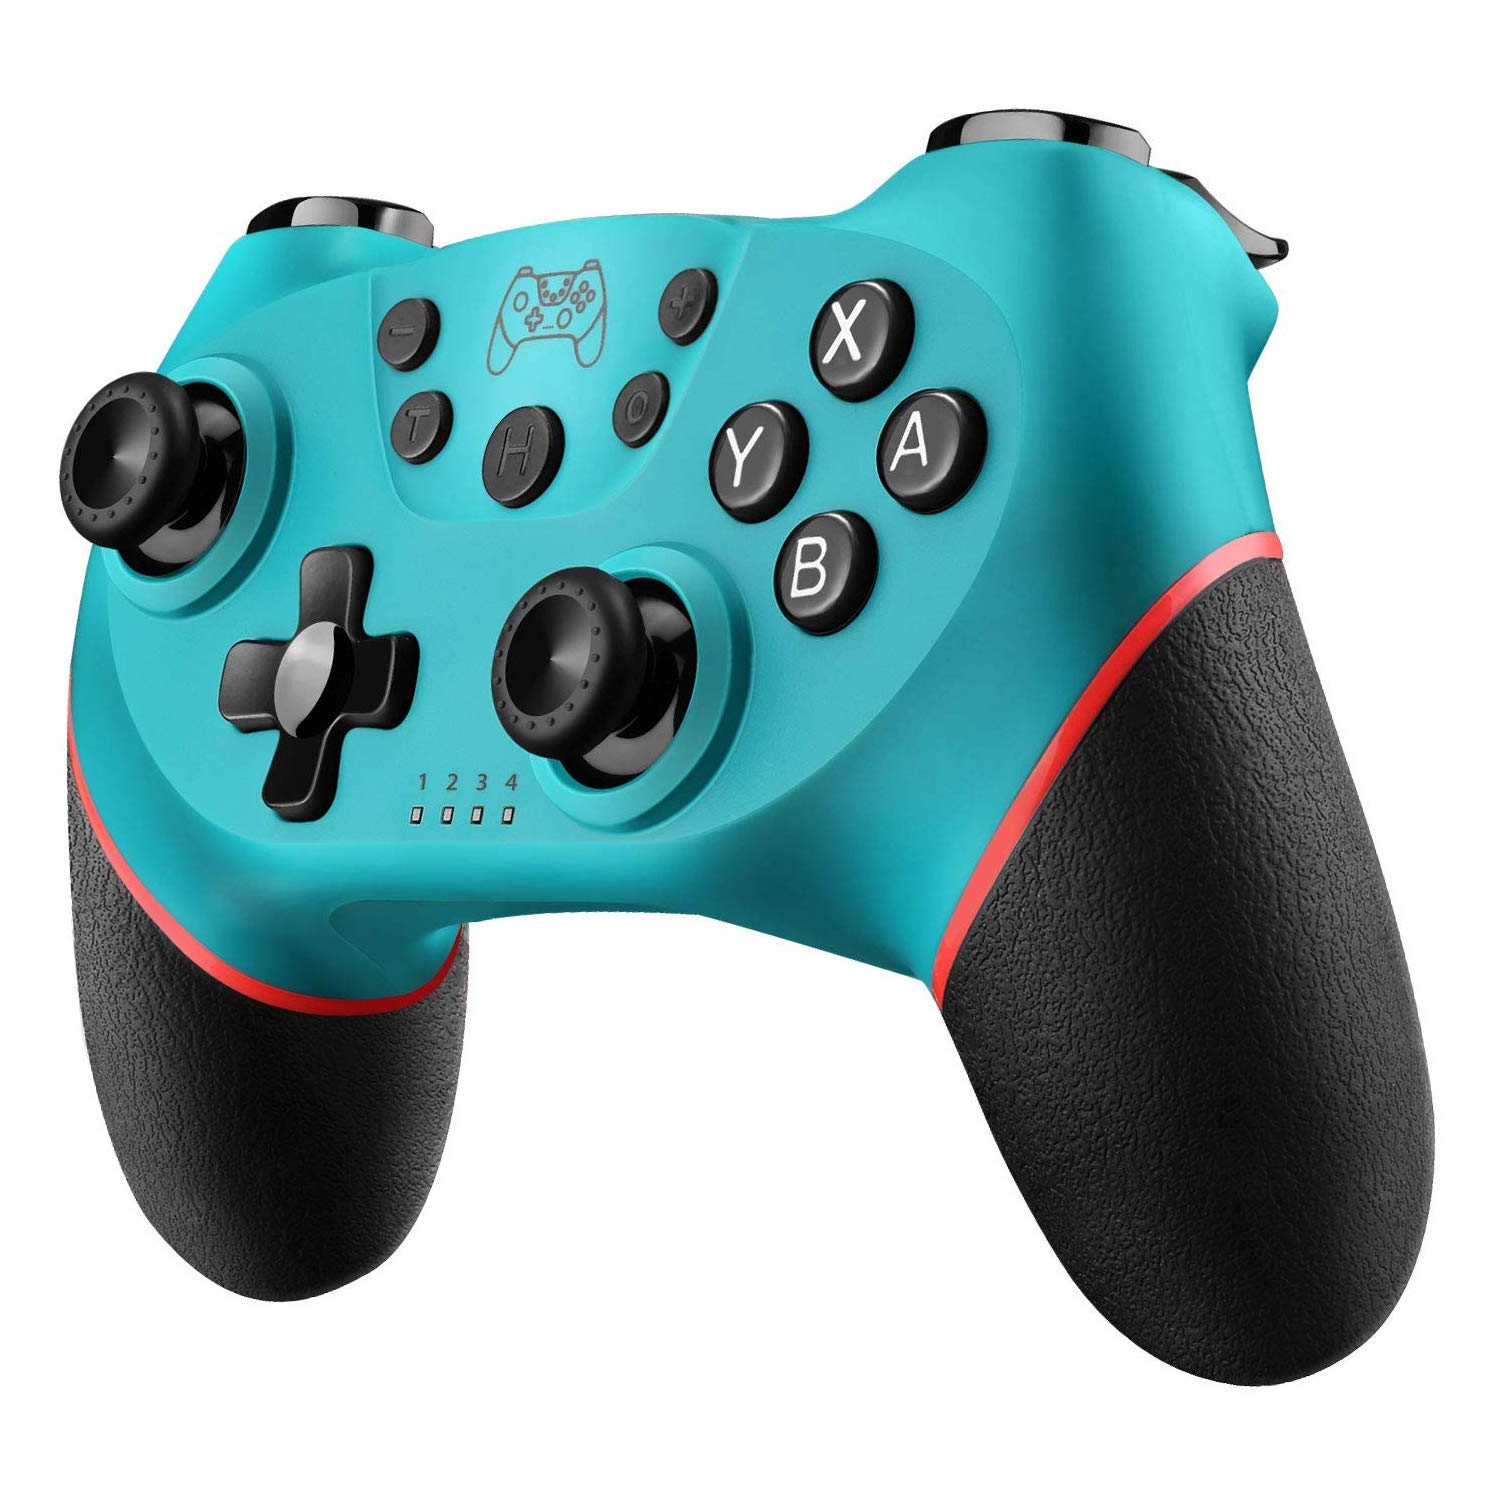 Switch Controller, Wireless Pro Controller Gamepad Compatible with Switch Support Amibo, Wakeup, Screenshot and Vibration Functions